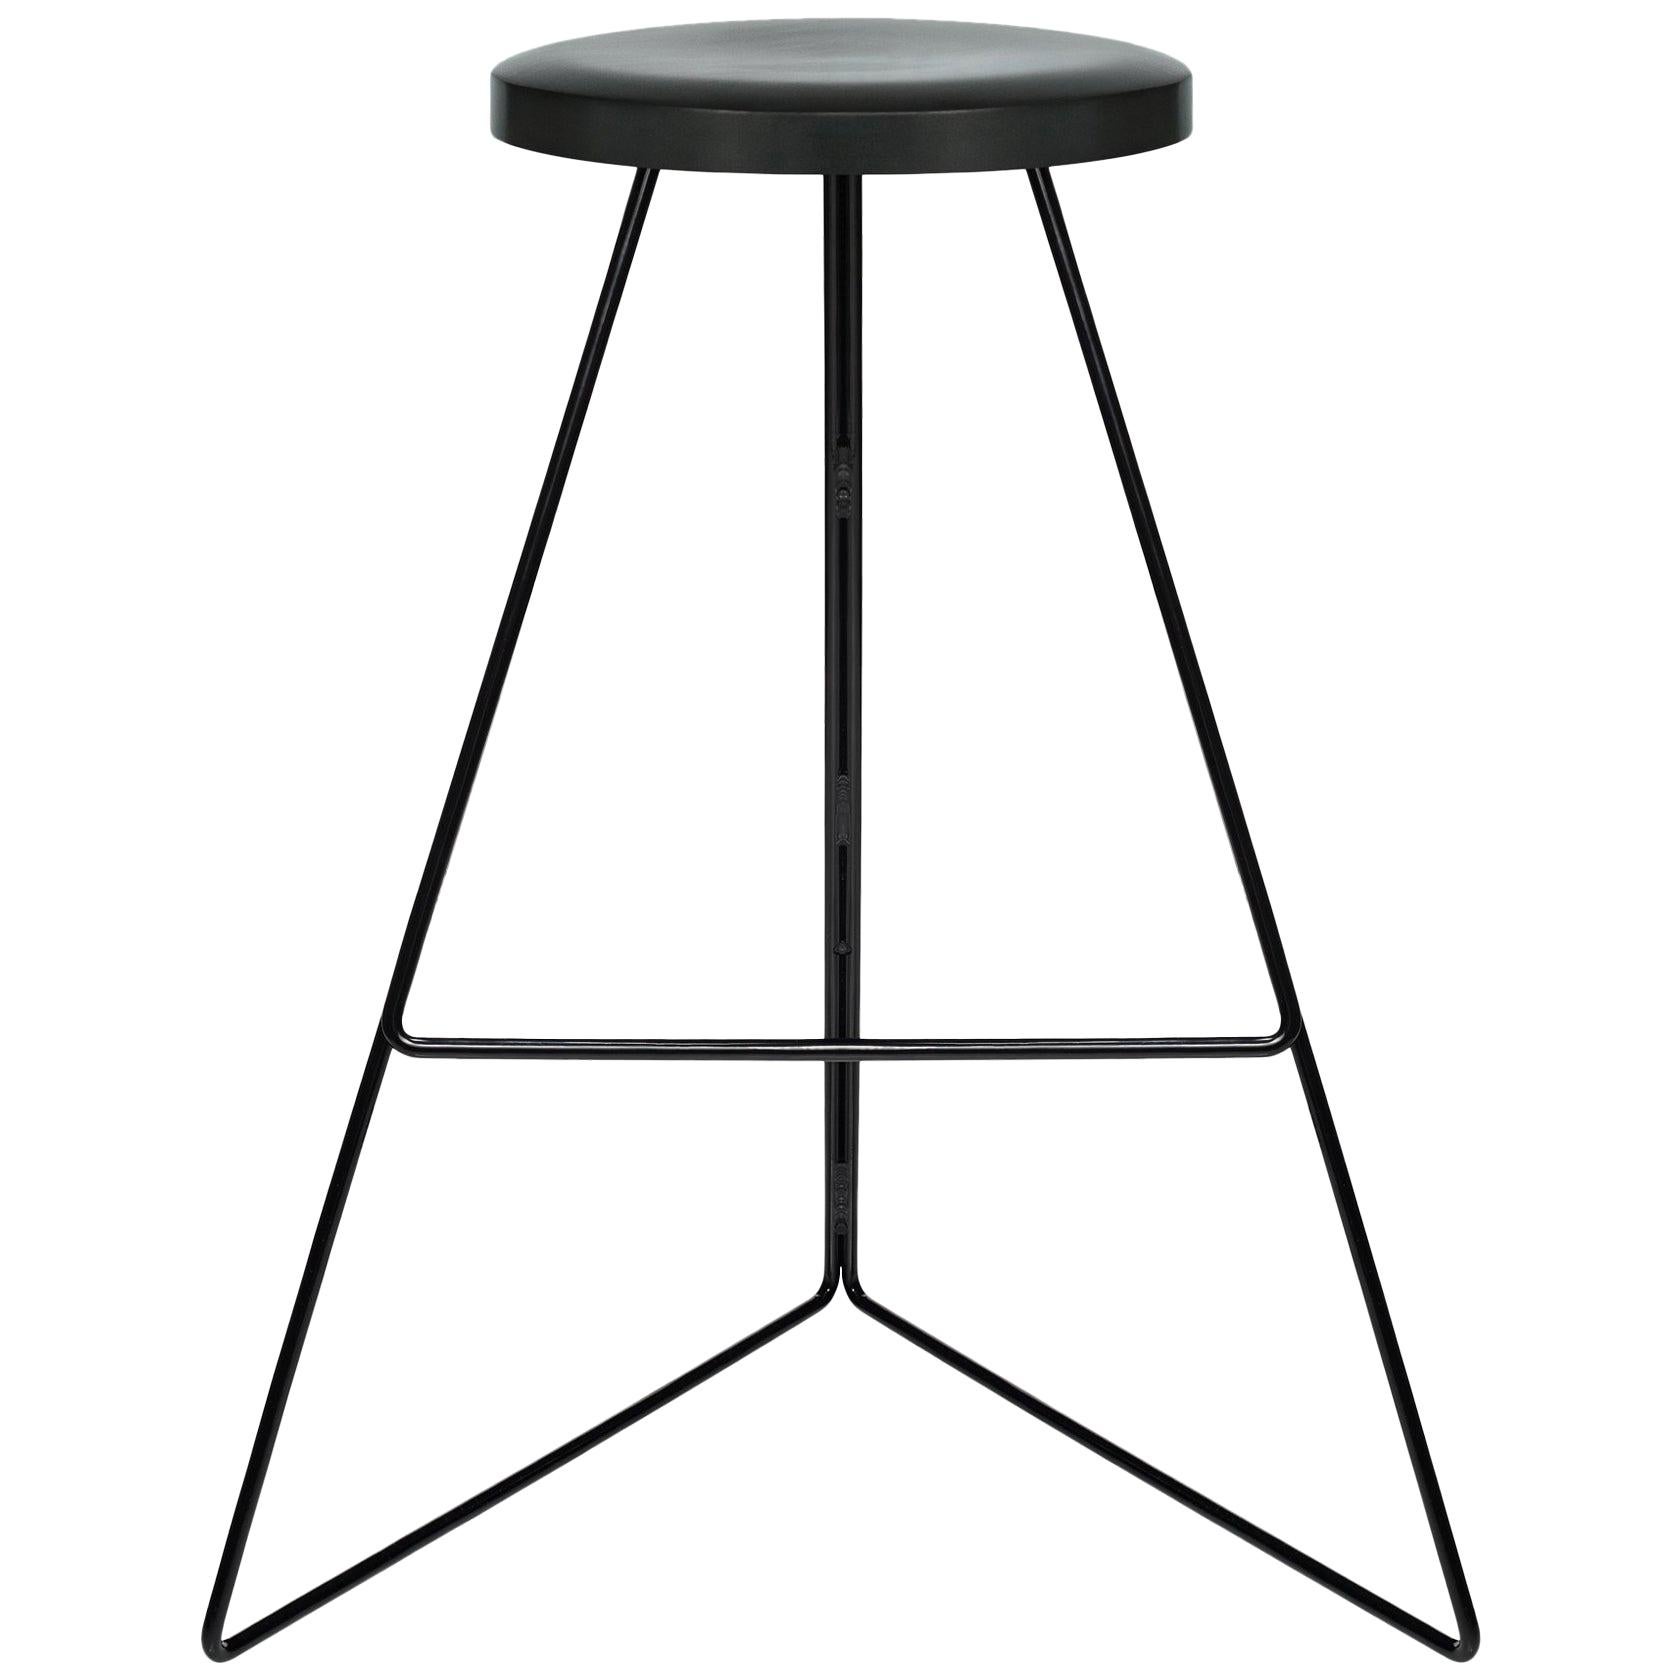 The Coleman Stool, Black and Charcoal For Sale